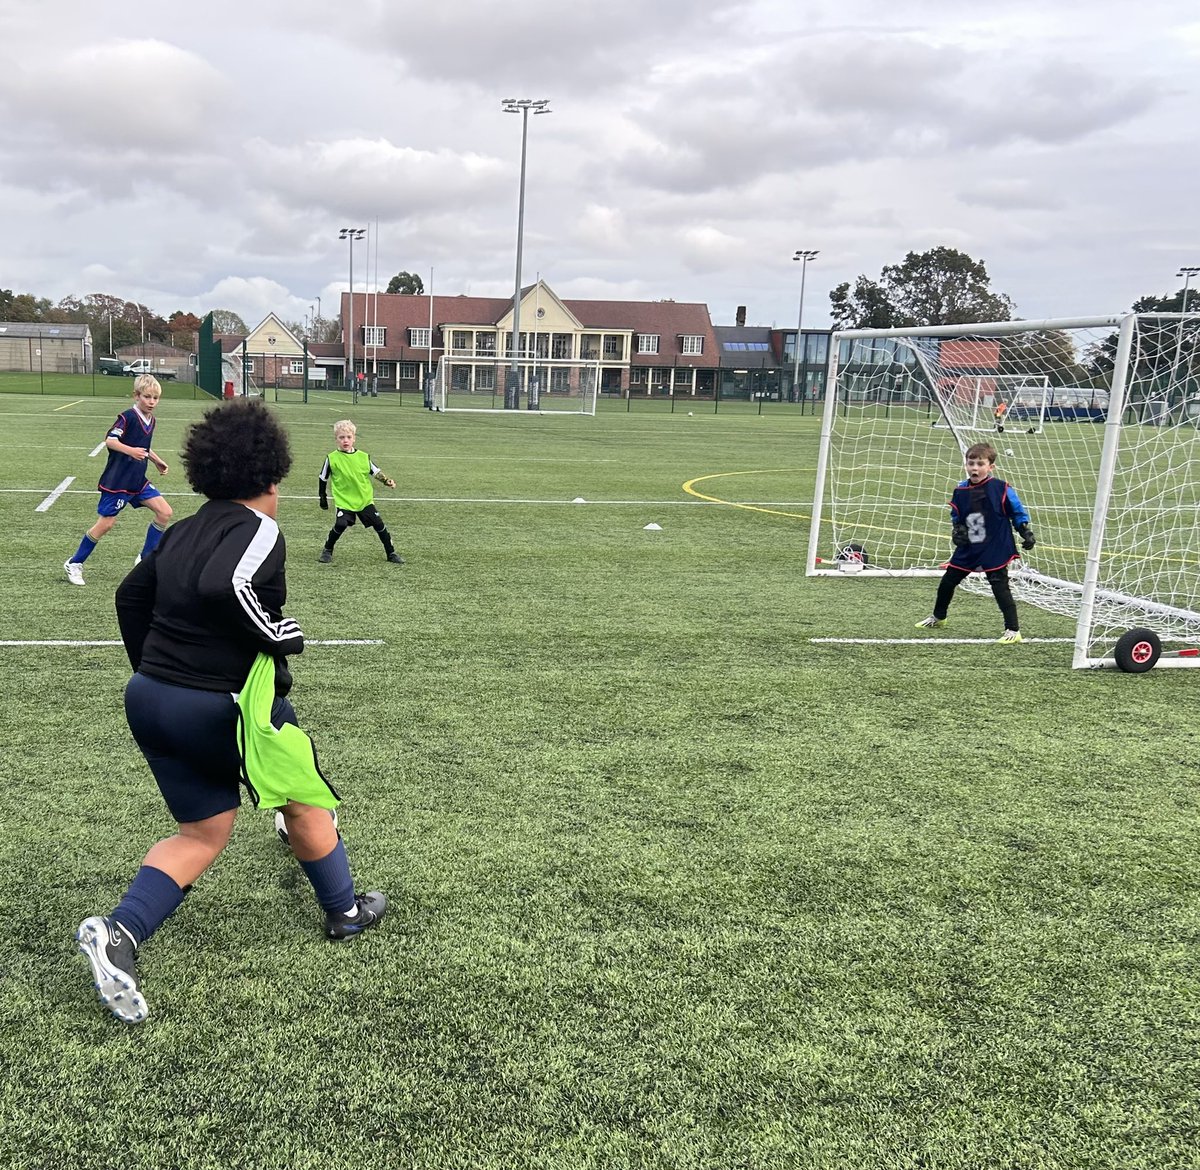 The topic on day 2 of our @NWRHygiene holiday course was passing and receiving. ⚽️ Improve passing accuracy ⚽️ Turning Technique 🧠 When and where to turn 🥅 Small sided games 😀 Lots of fun #playlearngrow